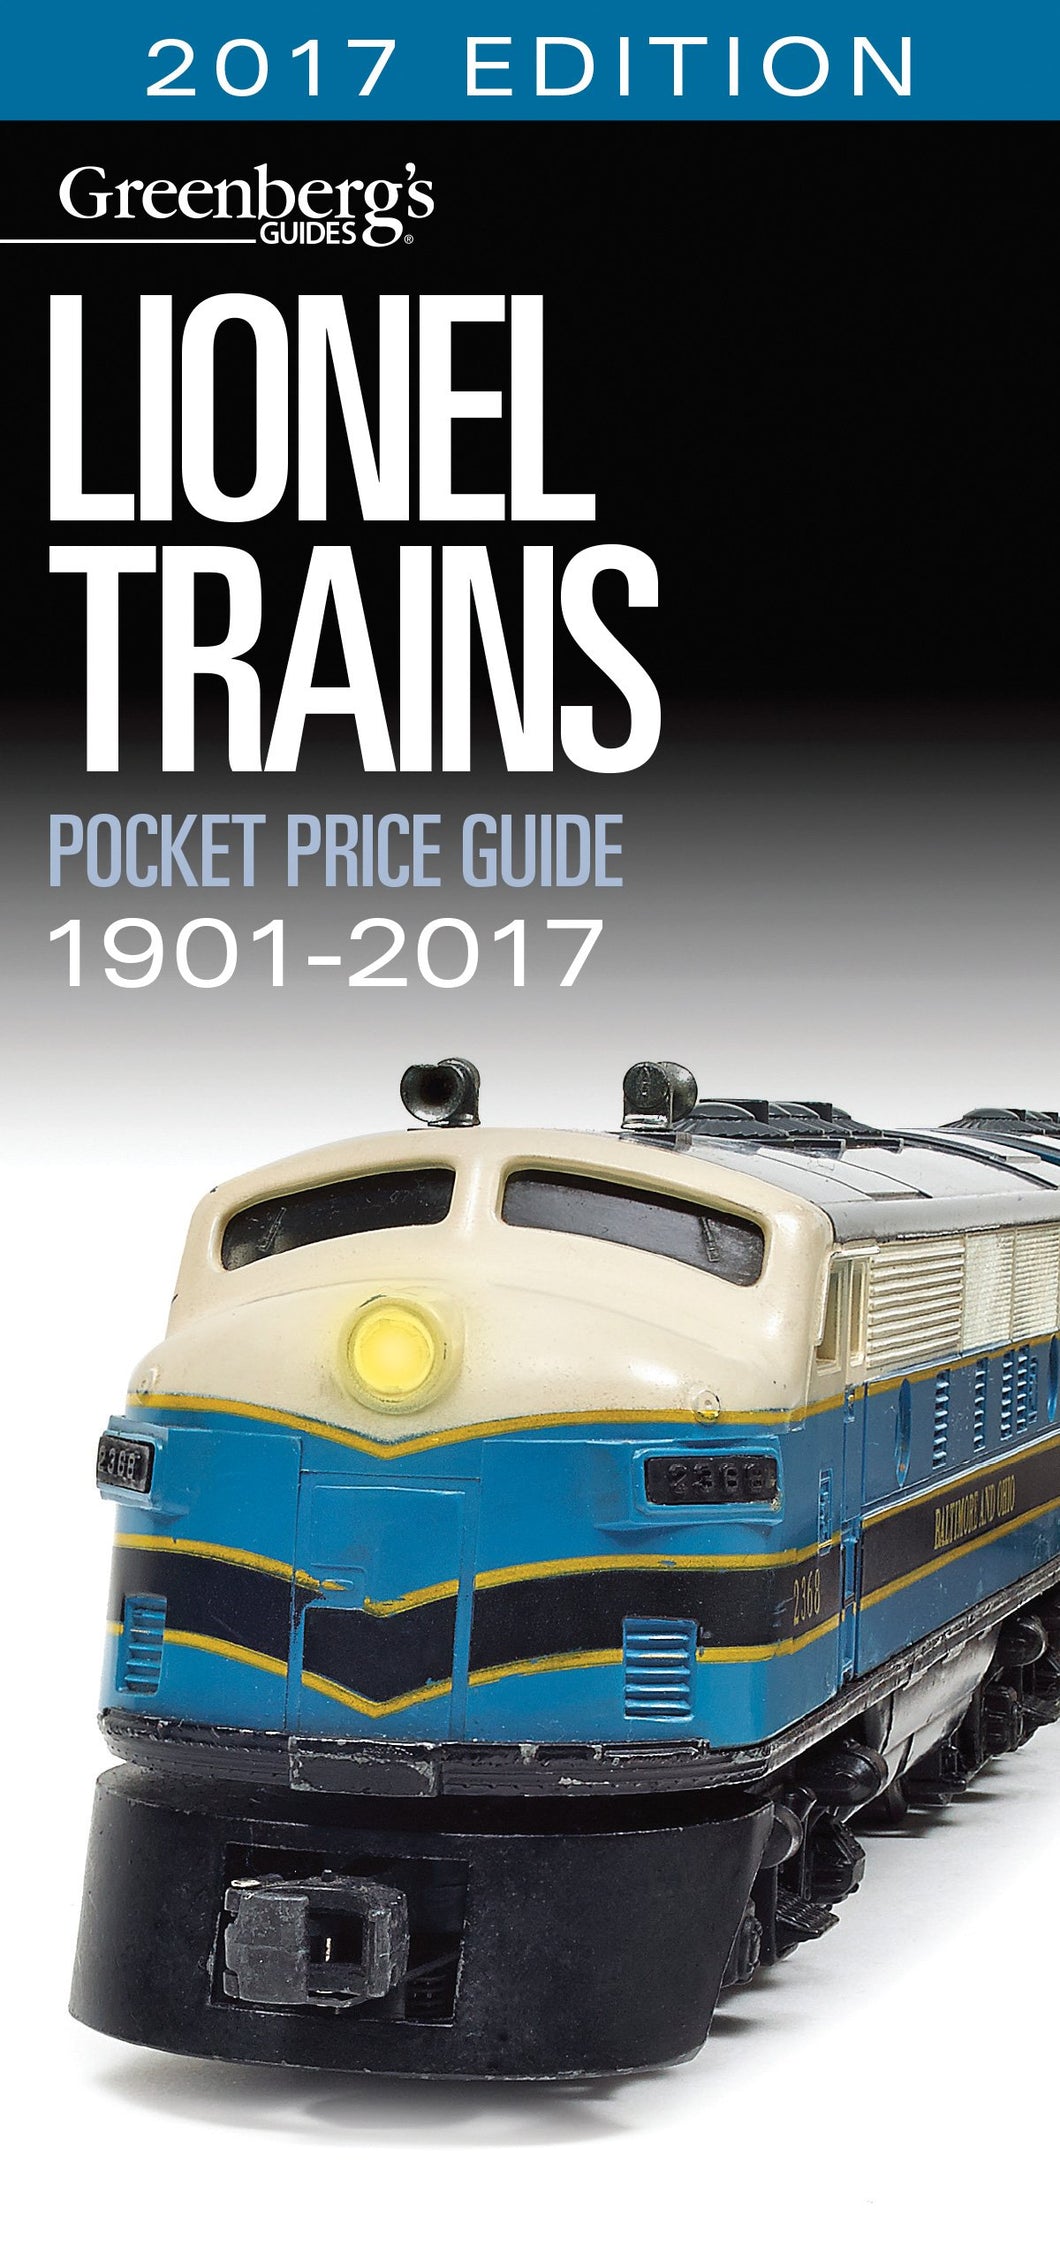 Greenberg's Guide to Lionel Trains 1901-2017 Pocket Price Guide #108717 424 pgs